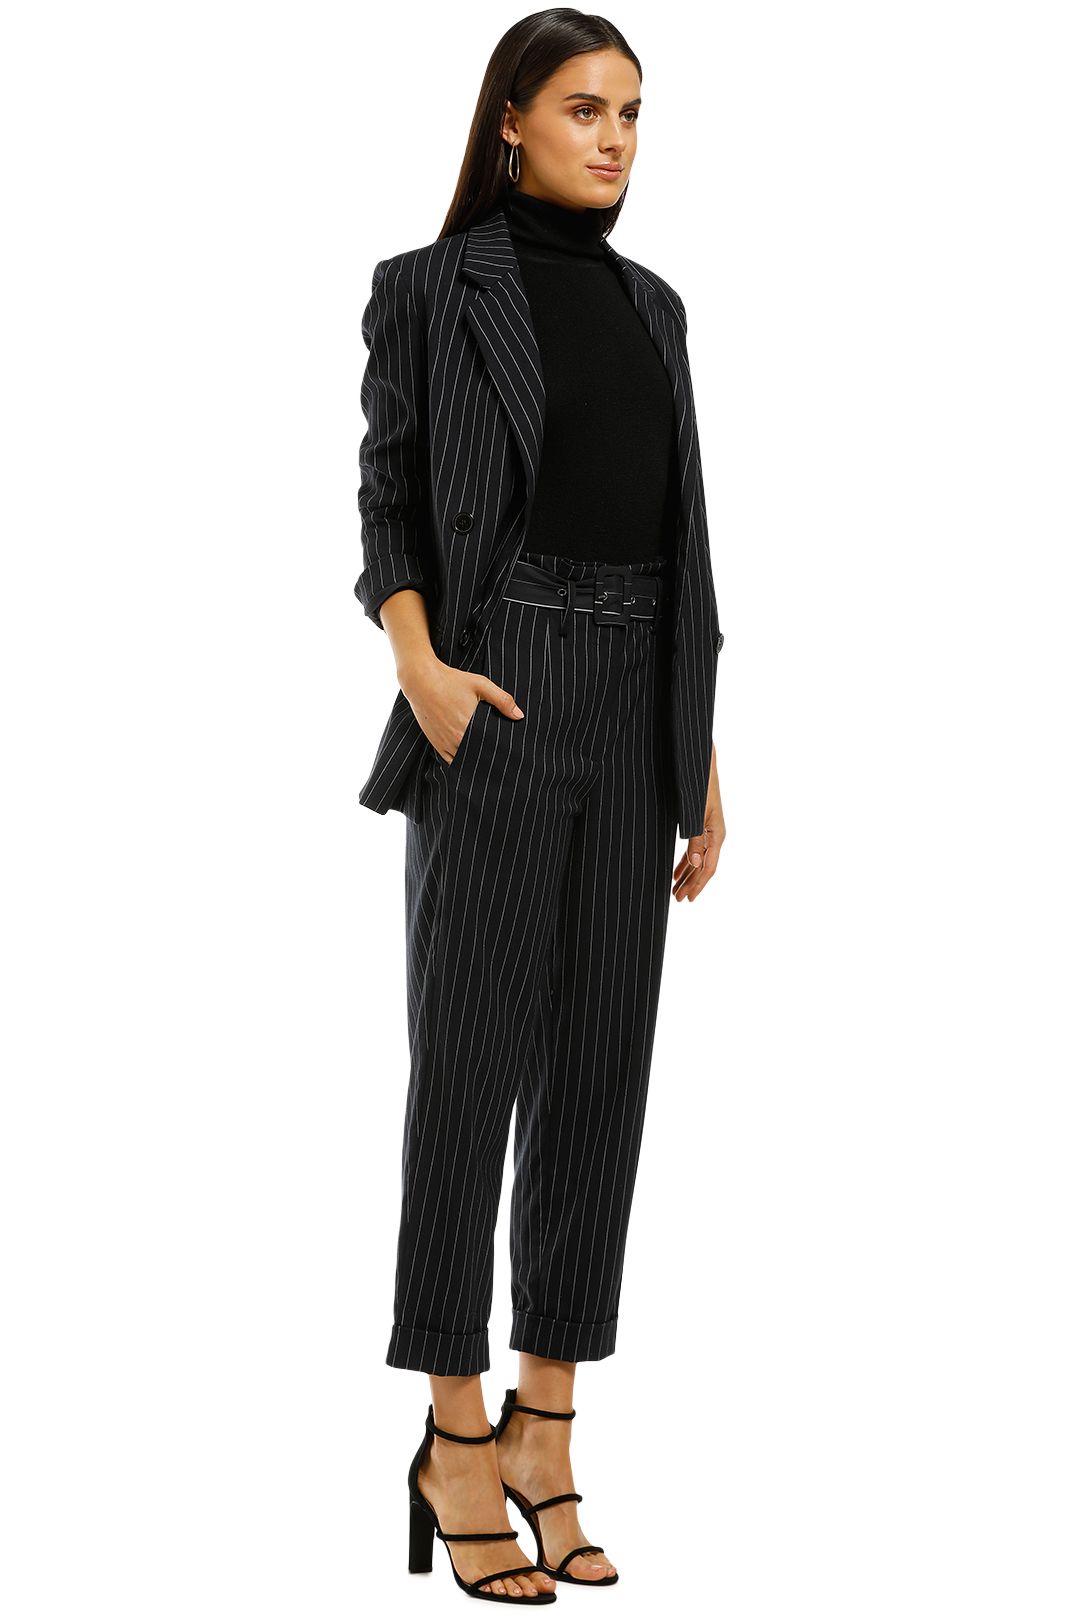 Nicholas the Label - Pinstripe Suiting Pant - Navy - Side